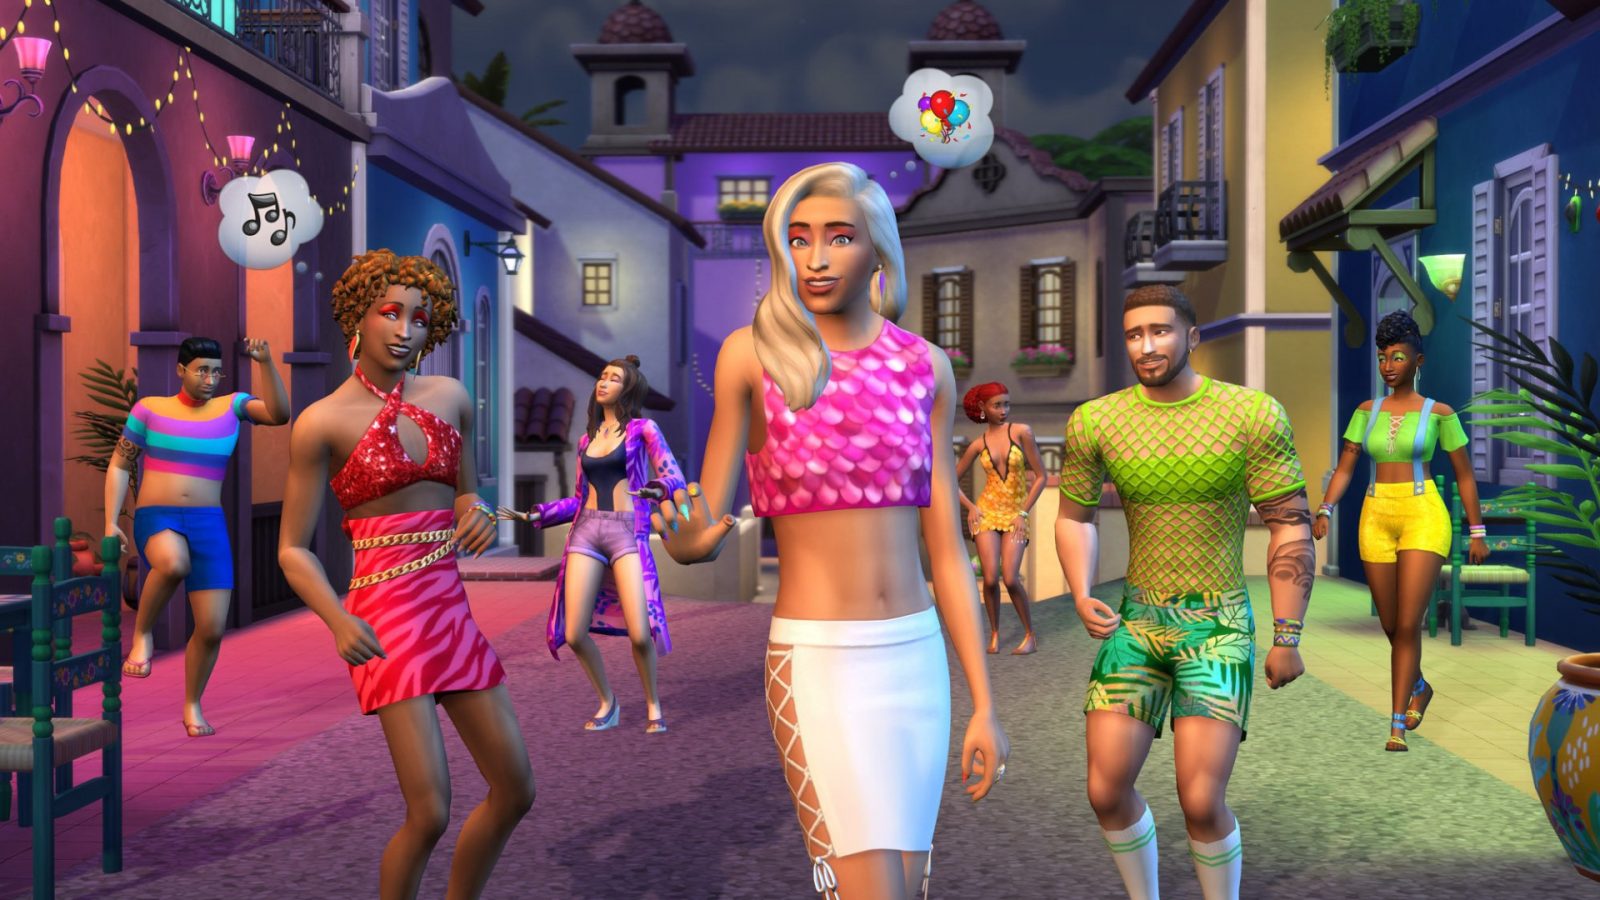 The Sims 4 Relationship Cheats For Friendship And Romance